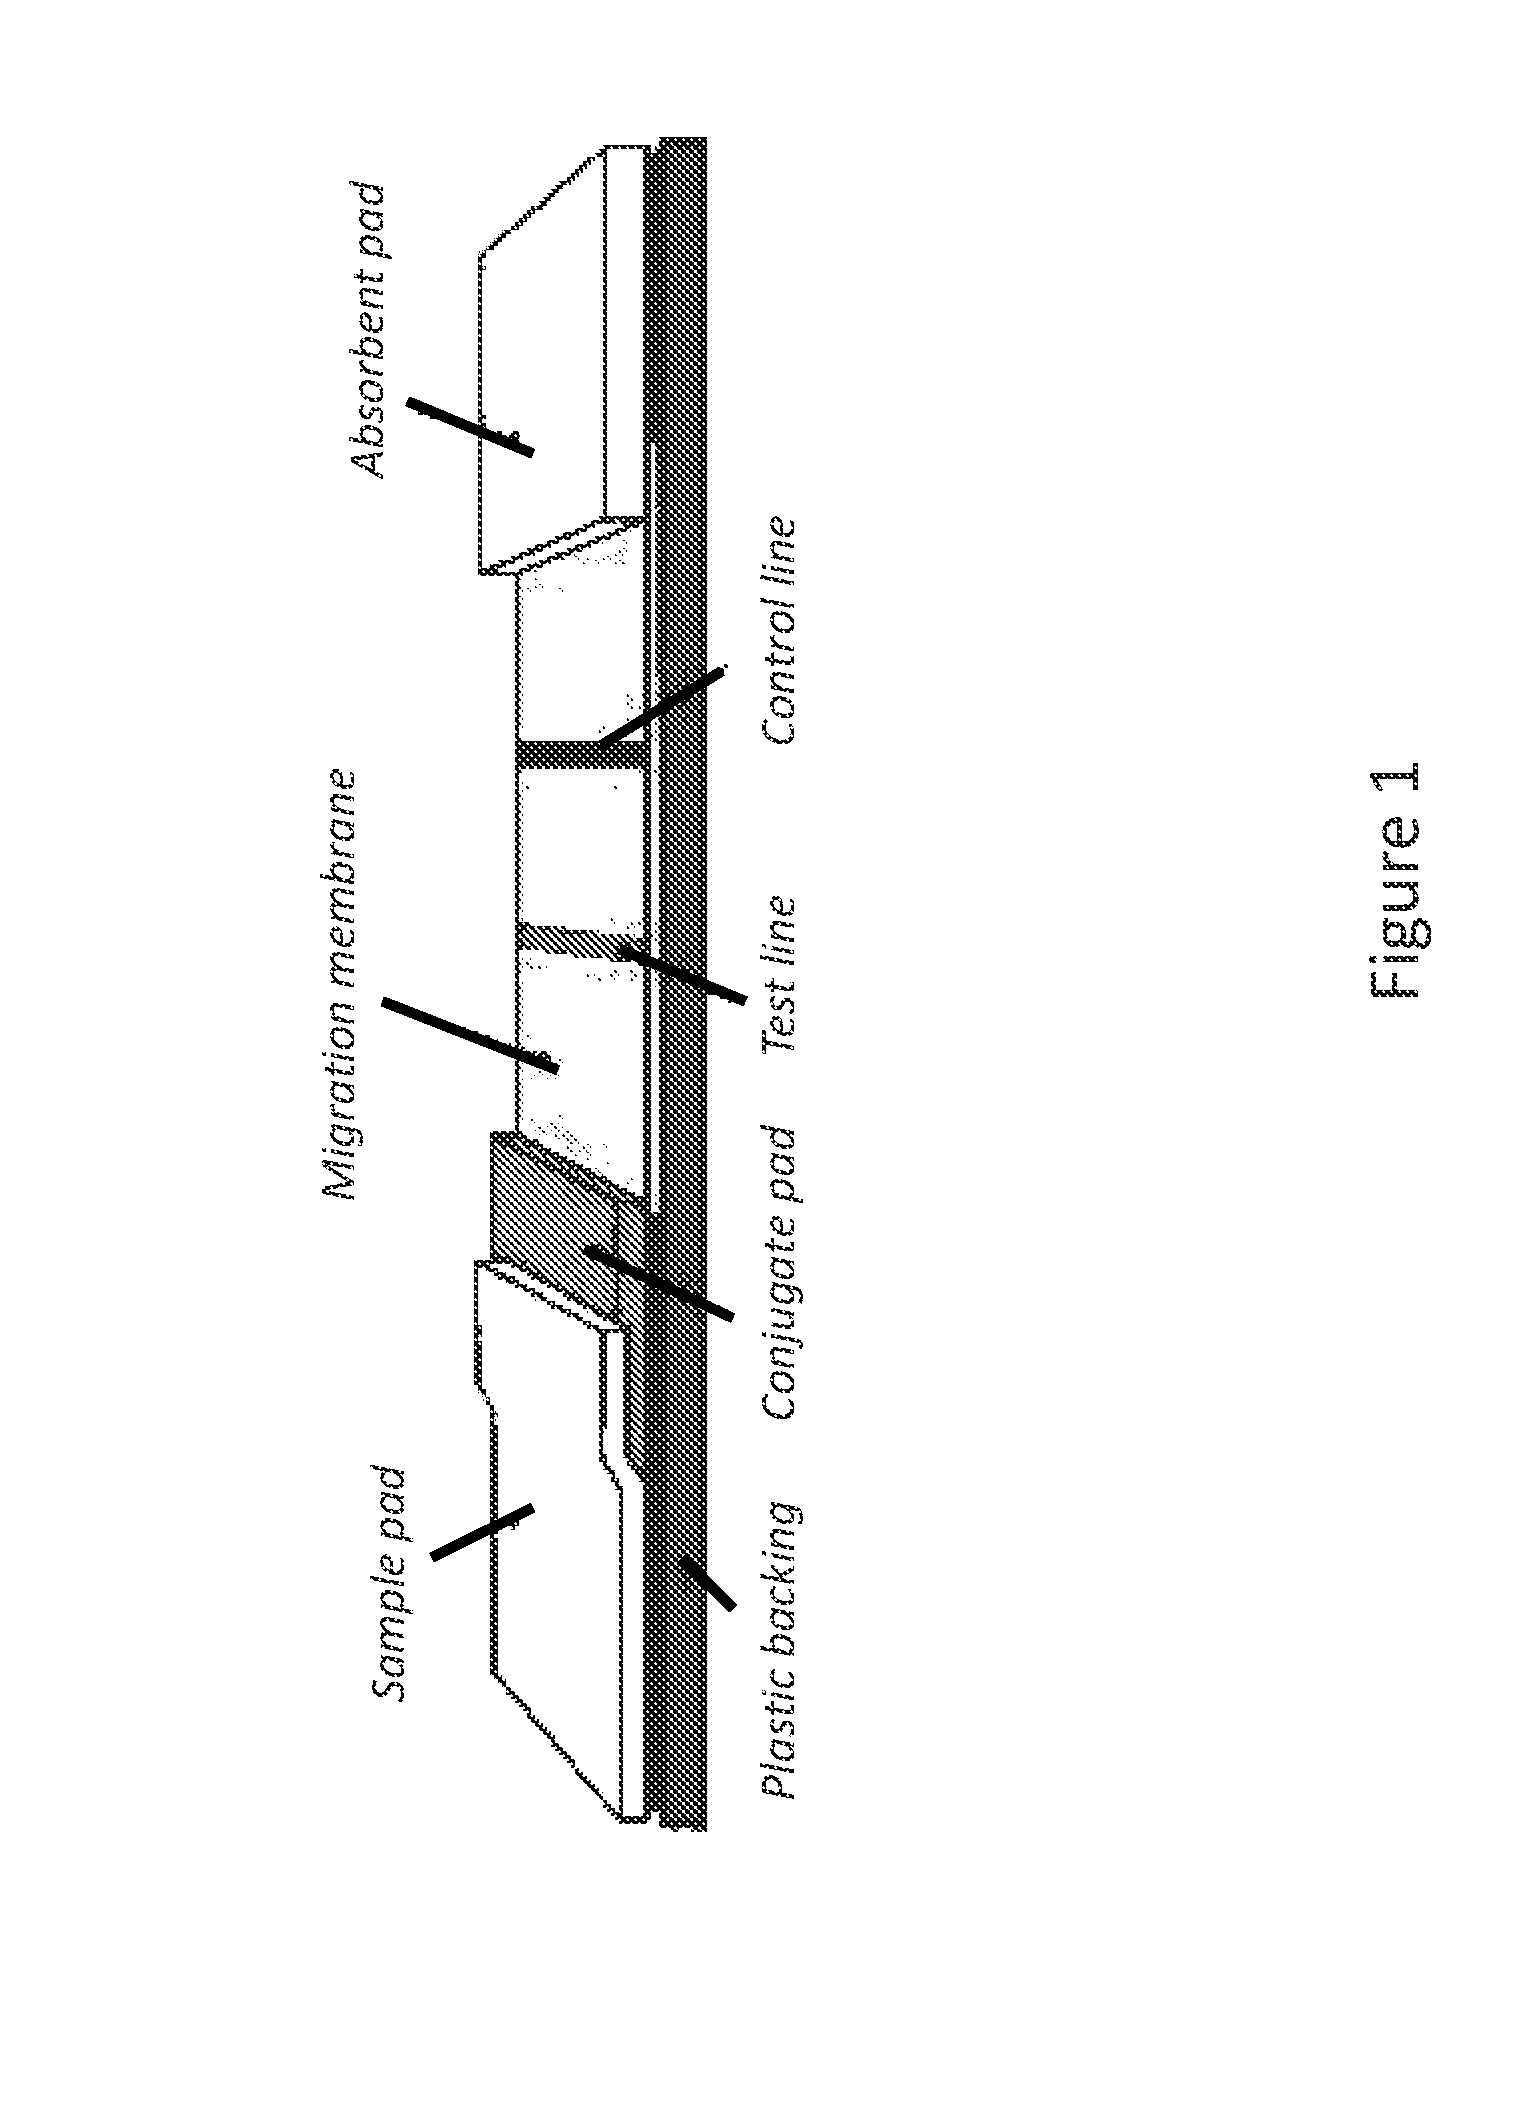 System for detecting infection in synovial fluid